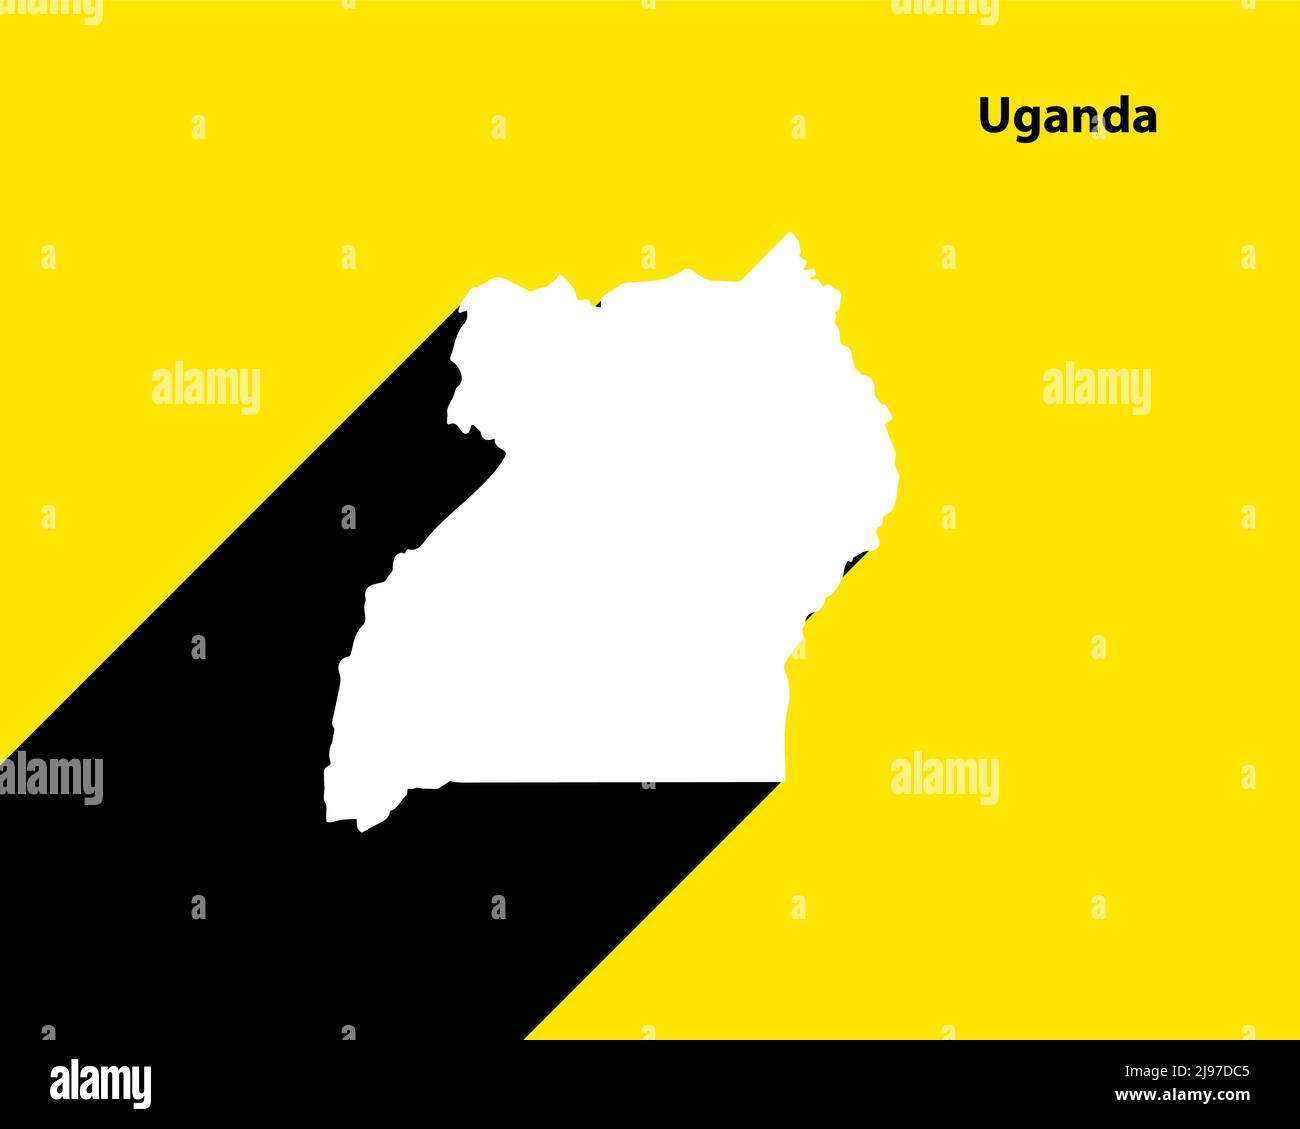 Uganda Map on retro poster with long shadow. Vintage sign easy to edit, manipulate, resize or colorize. Stock Vector